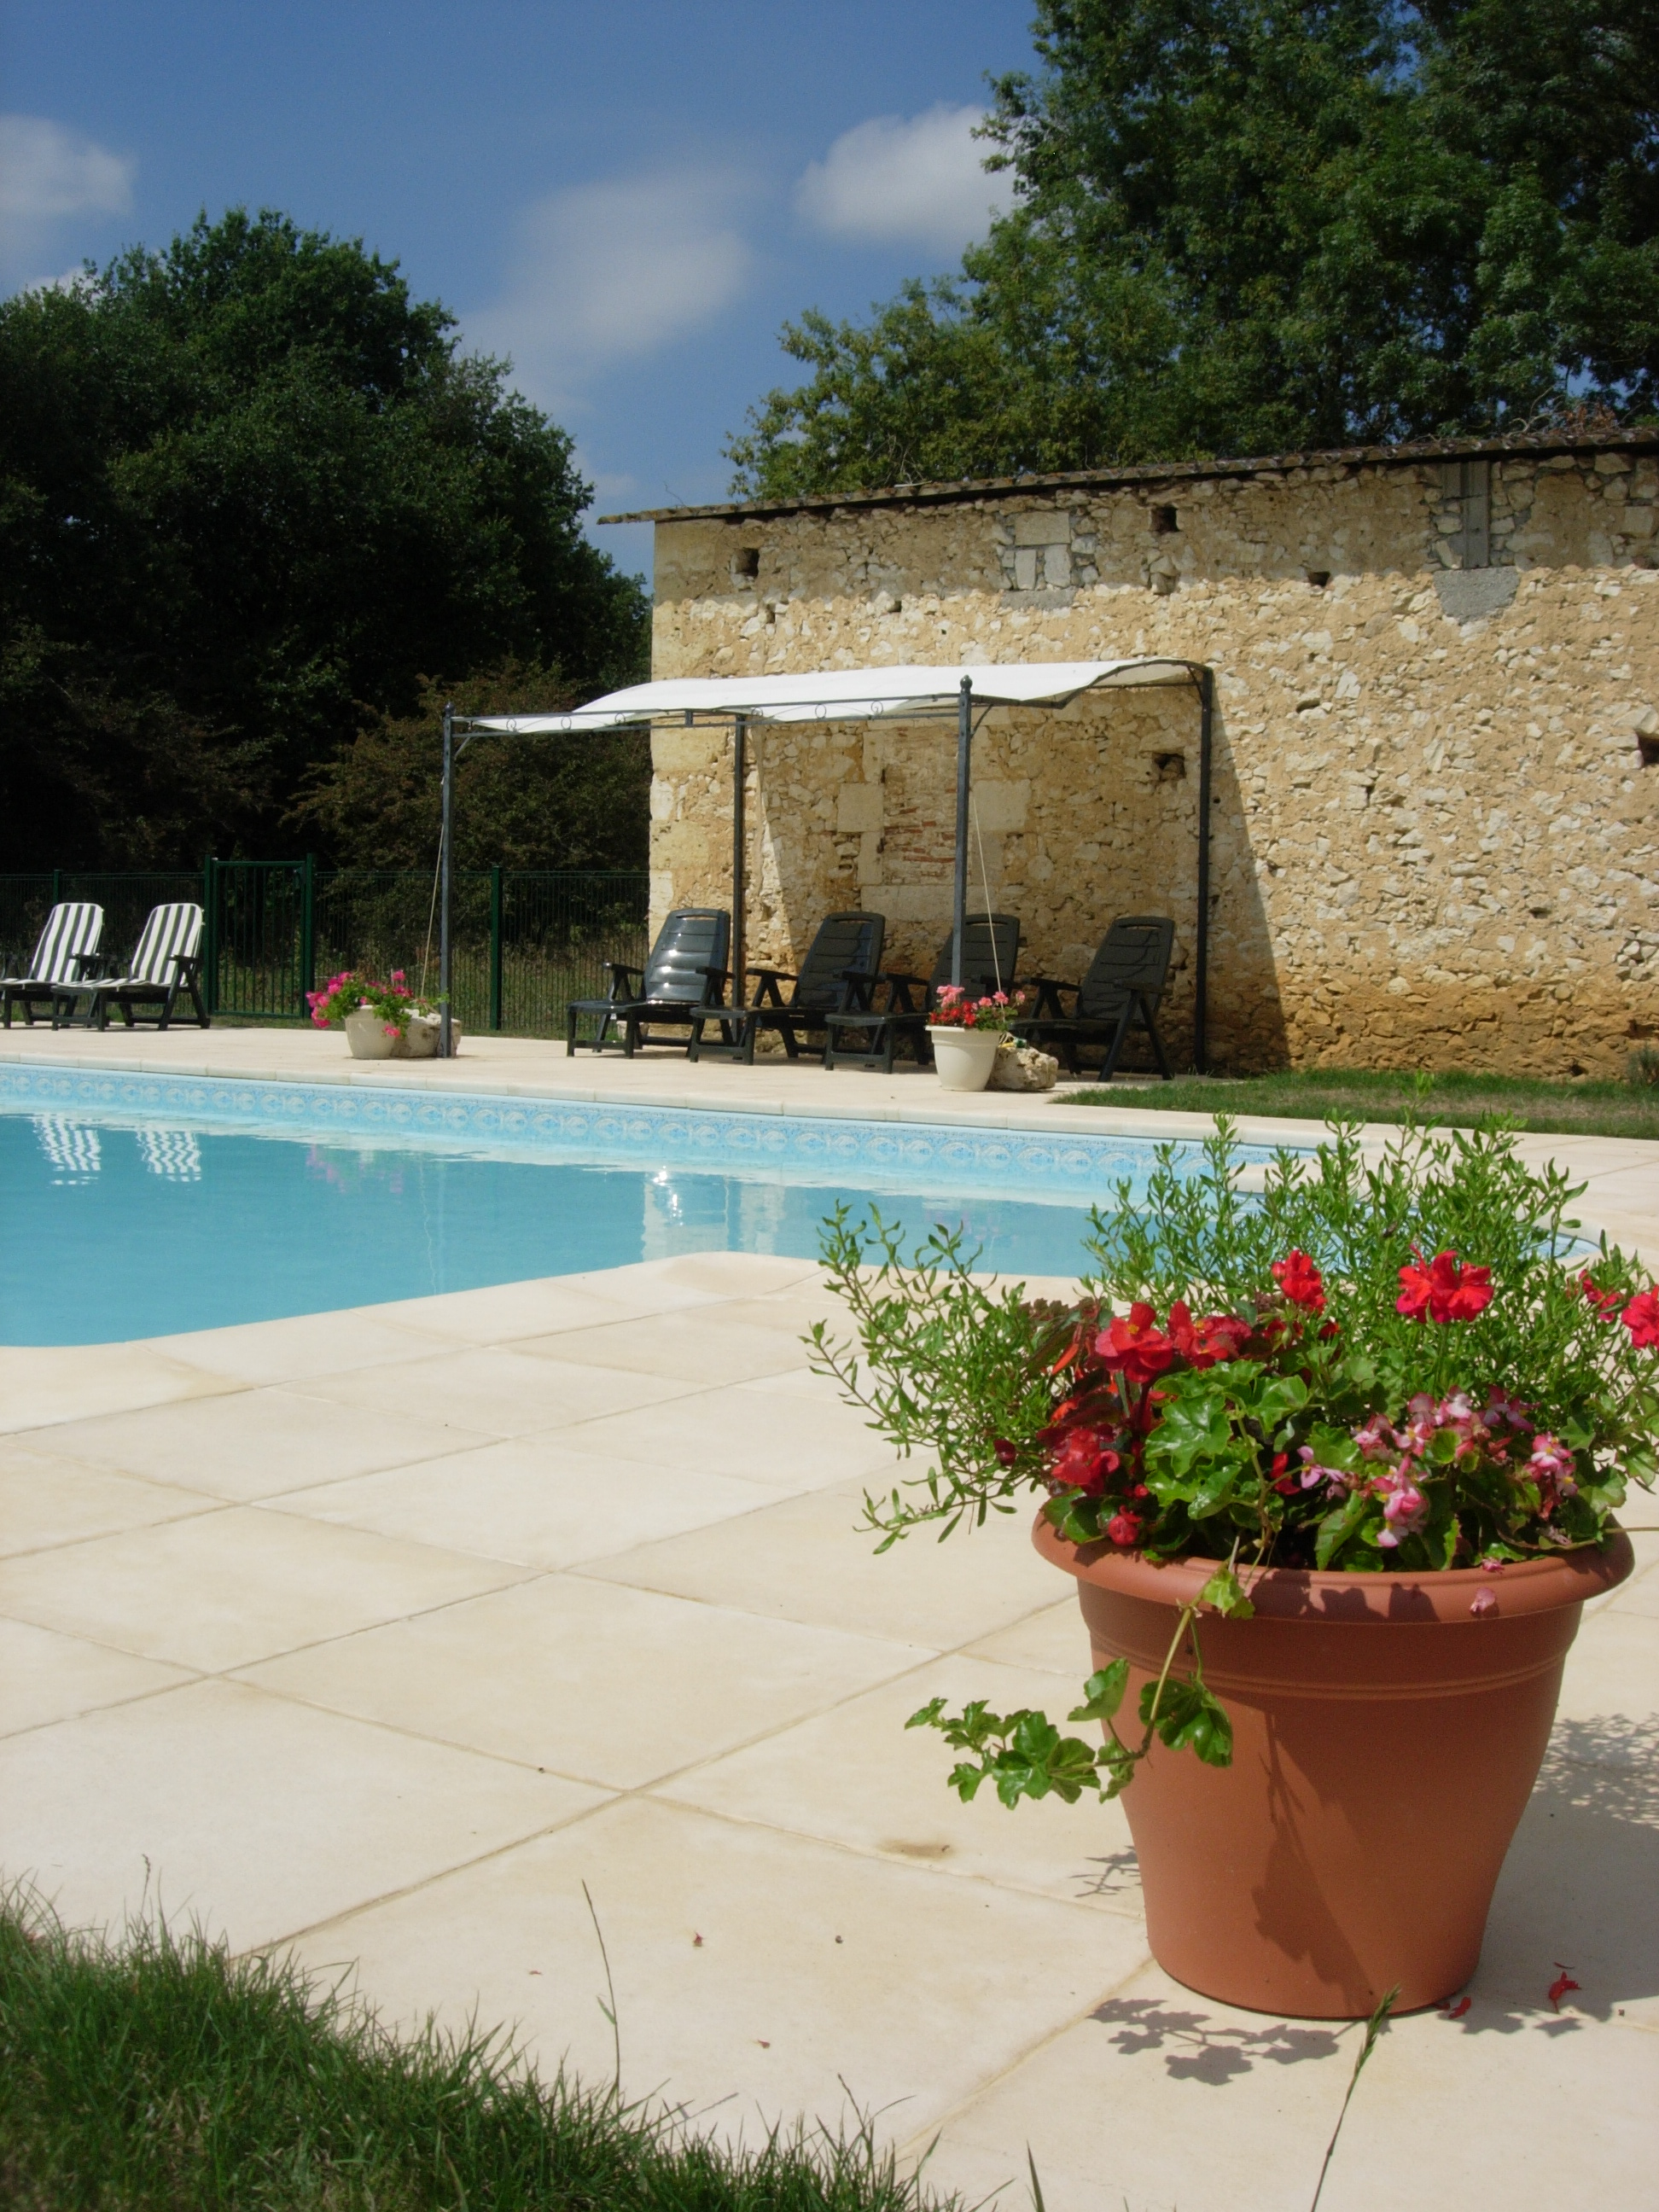 Swimming pool and patio at Barrusclet farmhosue gite